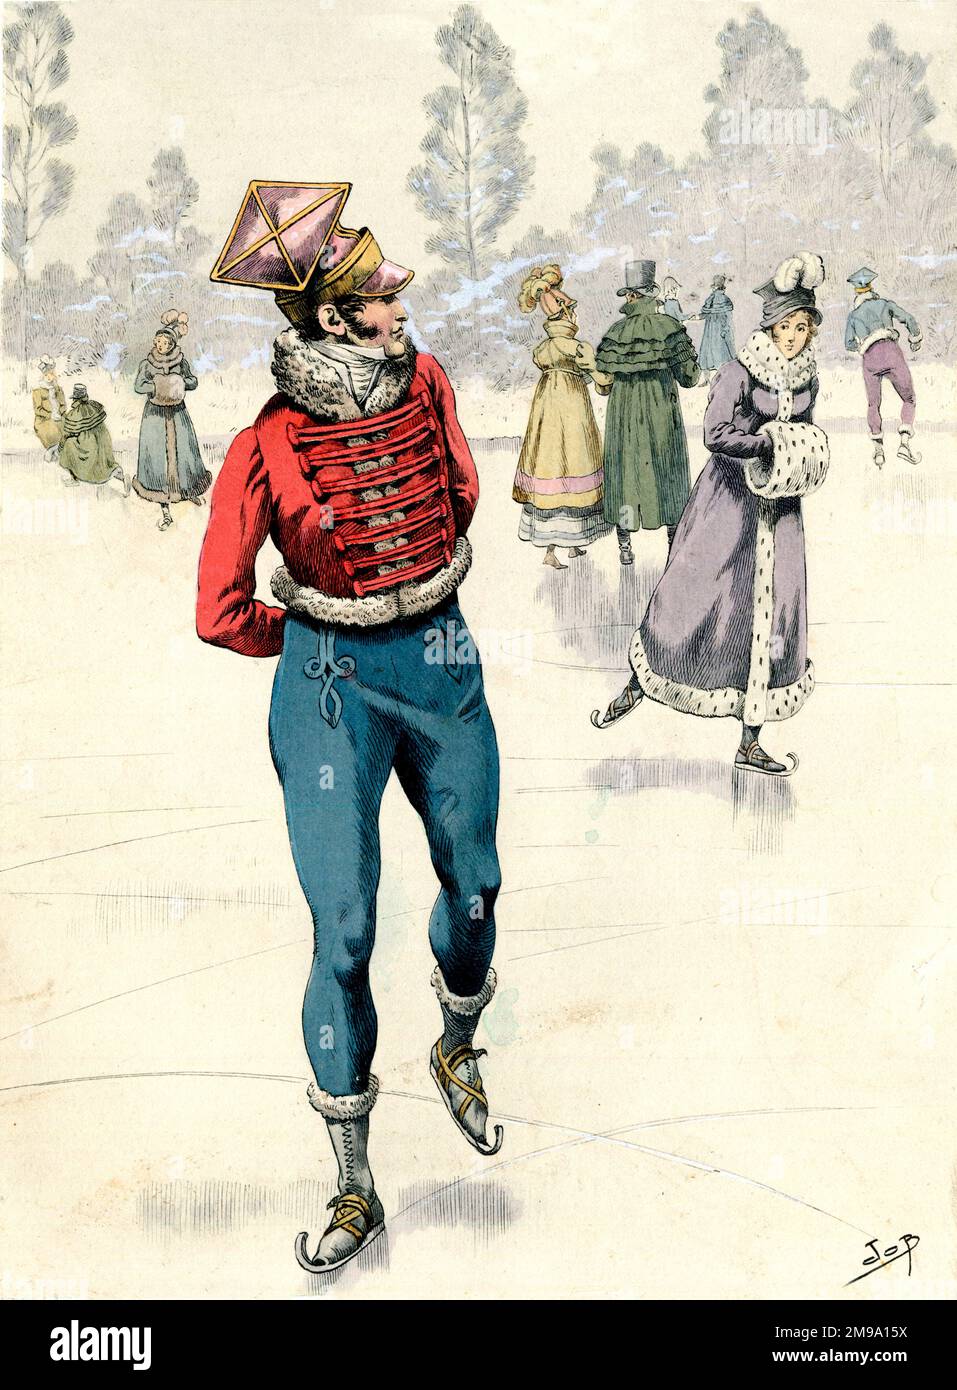 19th Century Ice Skating, German Soldier trying to impress Lady Skater Stock Photo